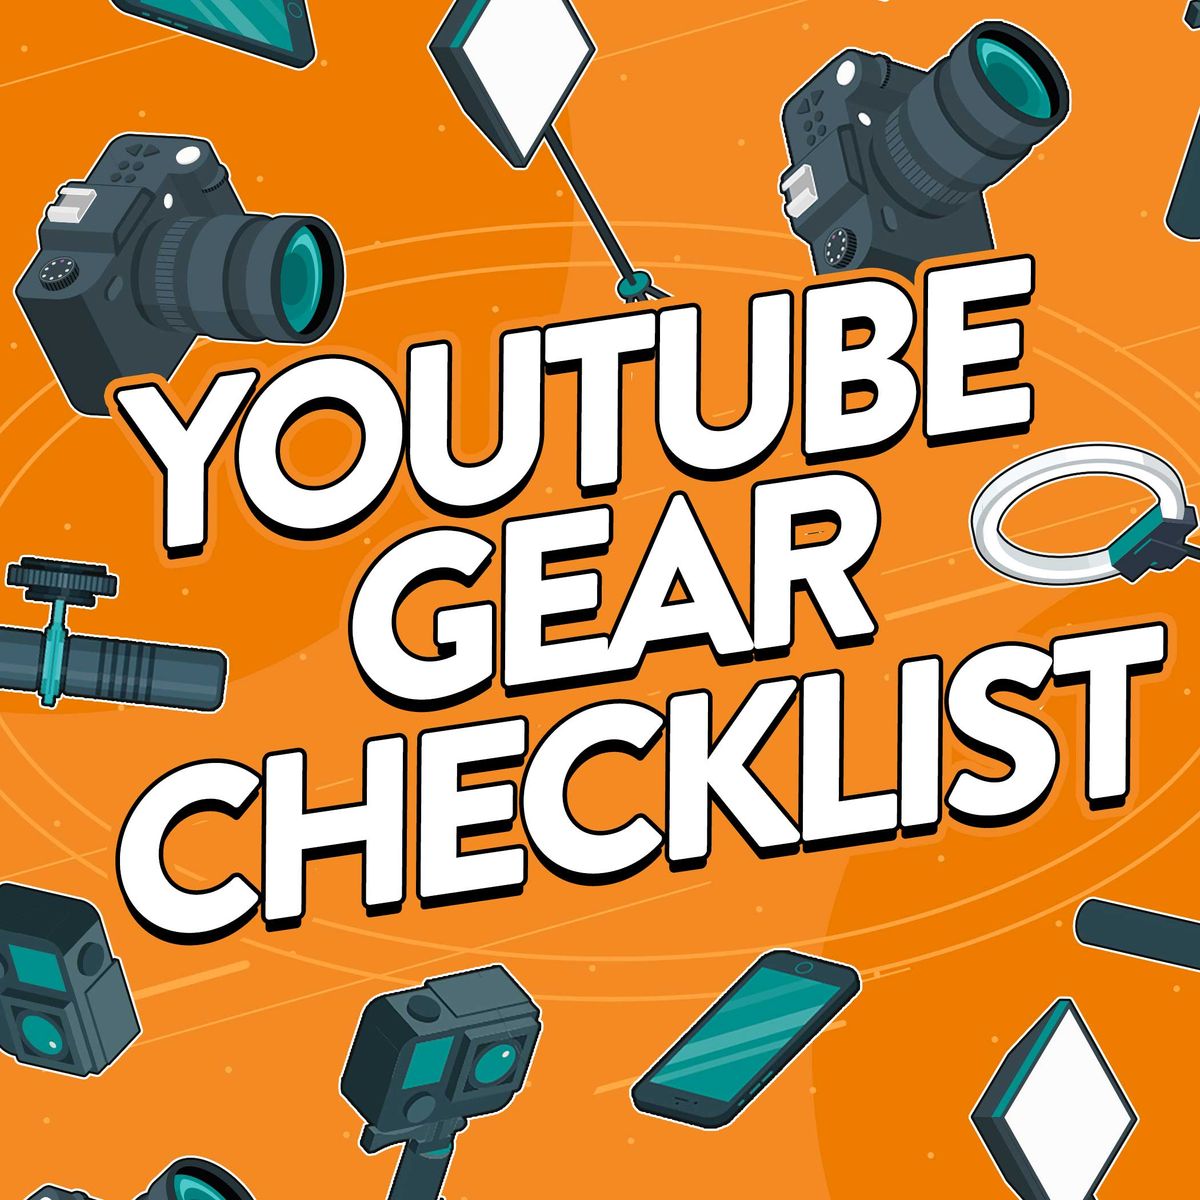 Illustration showing different types of YouTube equipment with text that says 'YouTube Gear Checklist' over the top.